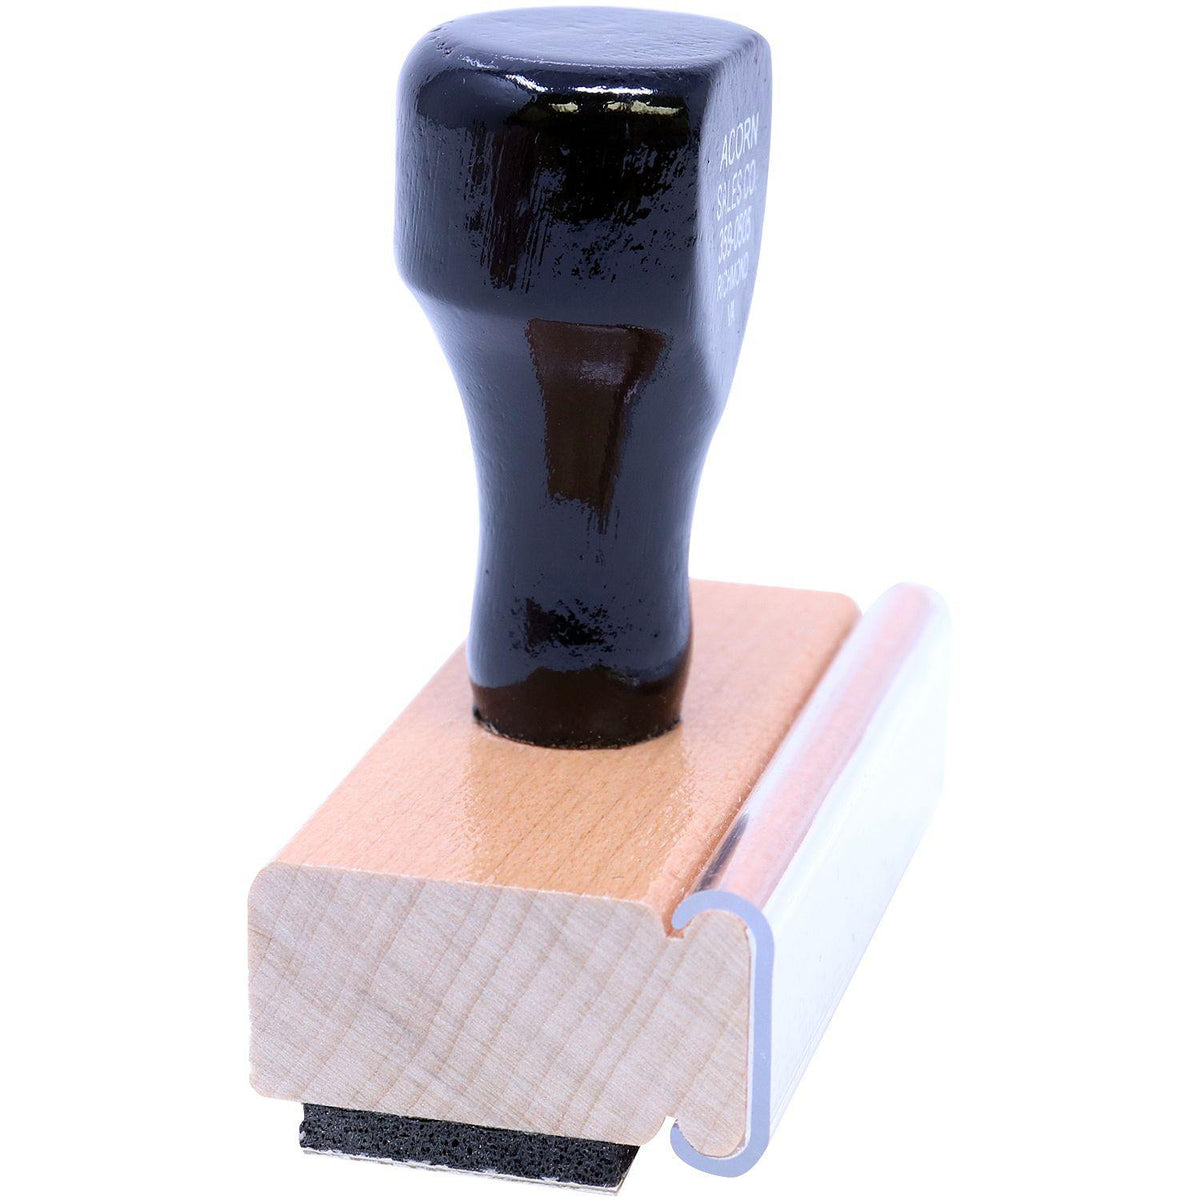 Large Unofficial Transcript Rubber Stamp - Engineer Seal Stamps - Brand_Acorn, Impression Size_Large, Stamp Type_Regular Stamp, Type of Use_Teacher